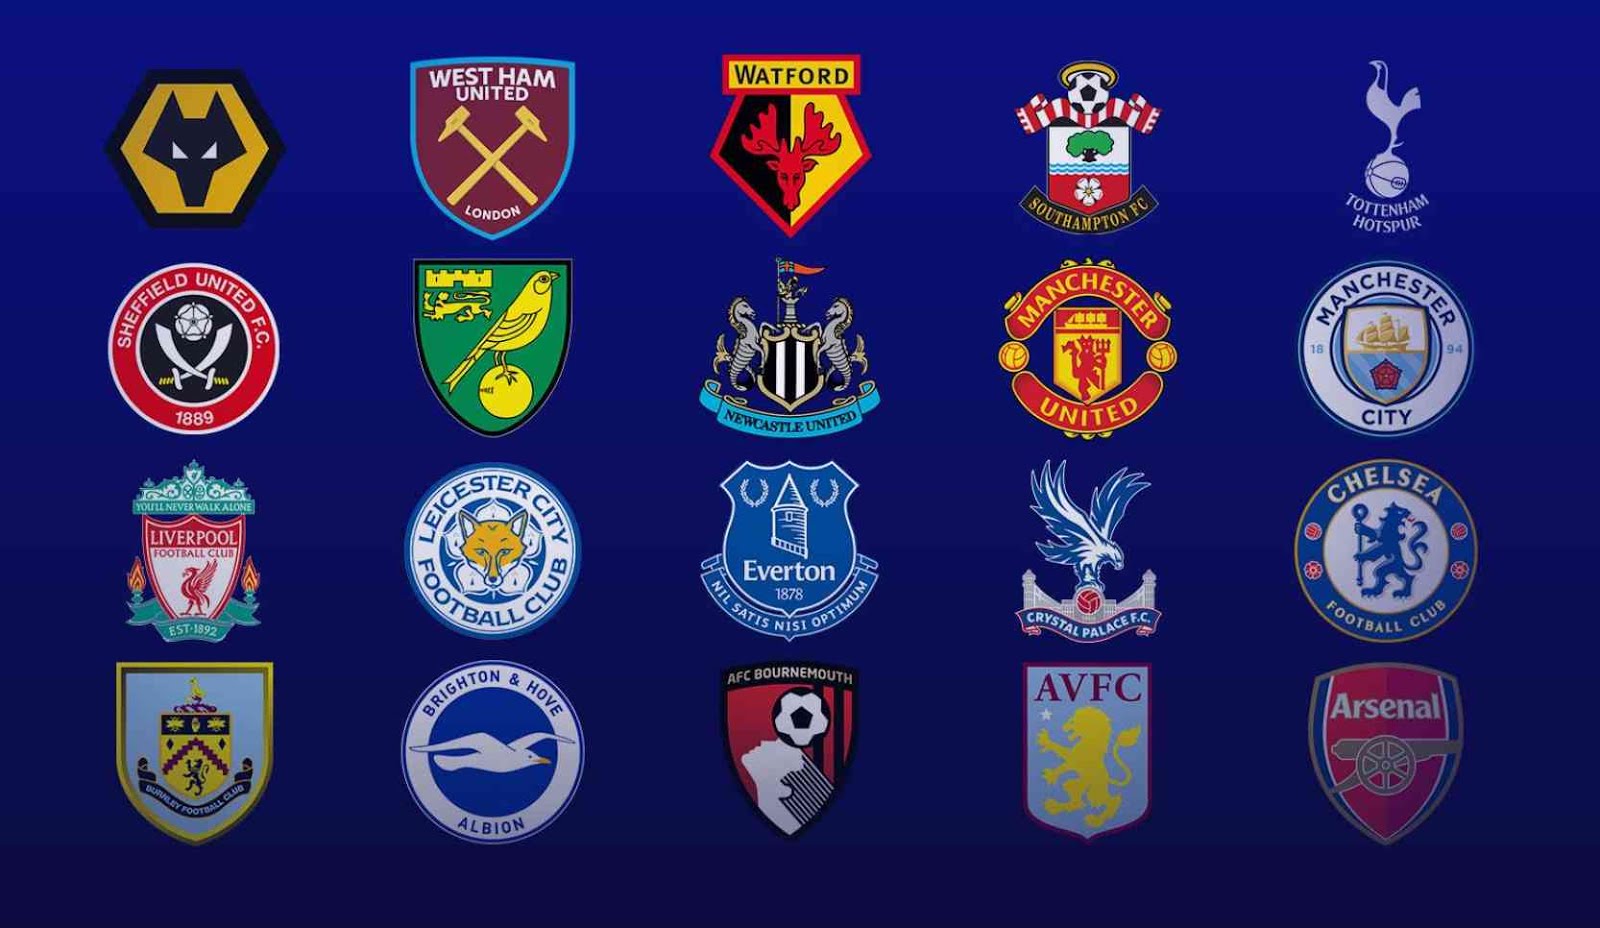 Who is the best team in Premier League table